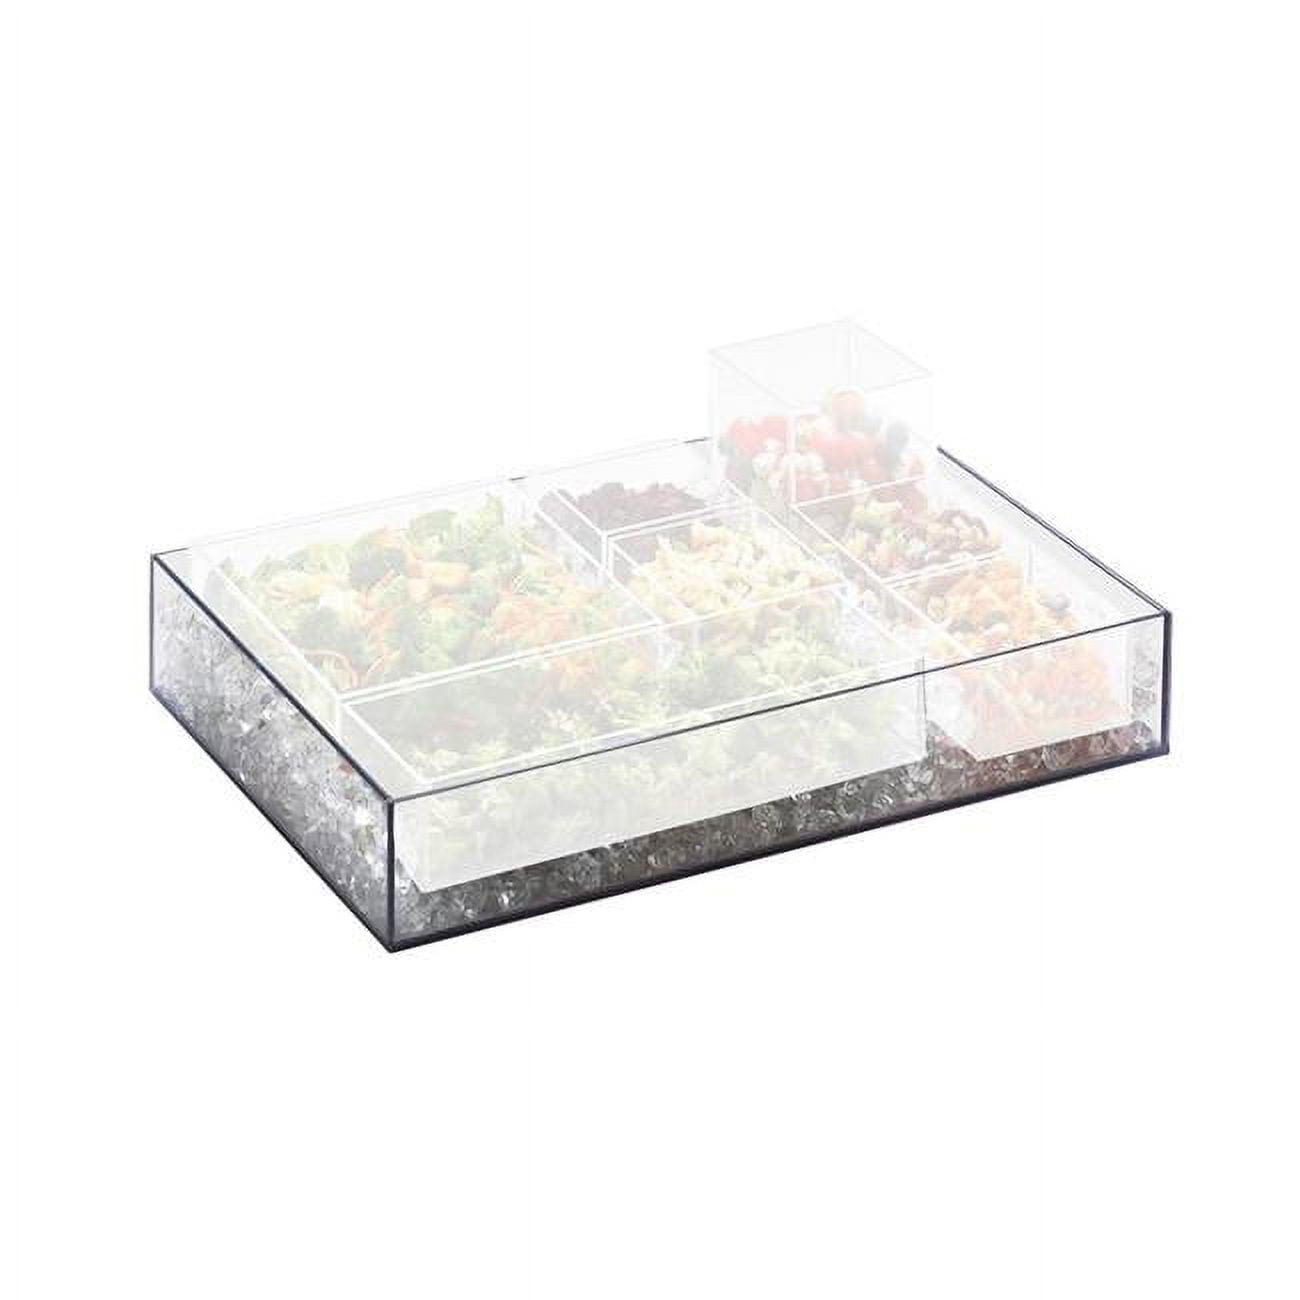 Picture of Cal Mil 1396-12 Cater Choice Clear Acrylic Accessory Bowl - 5 x 15 x 3 in.